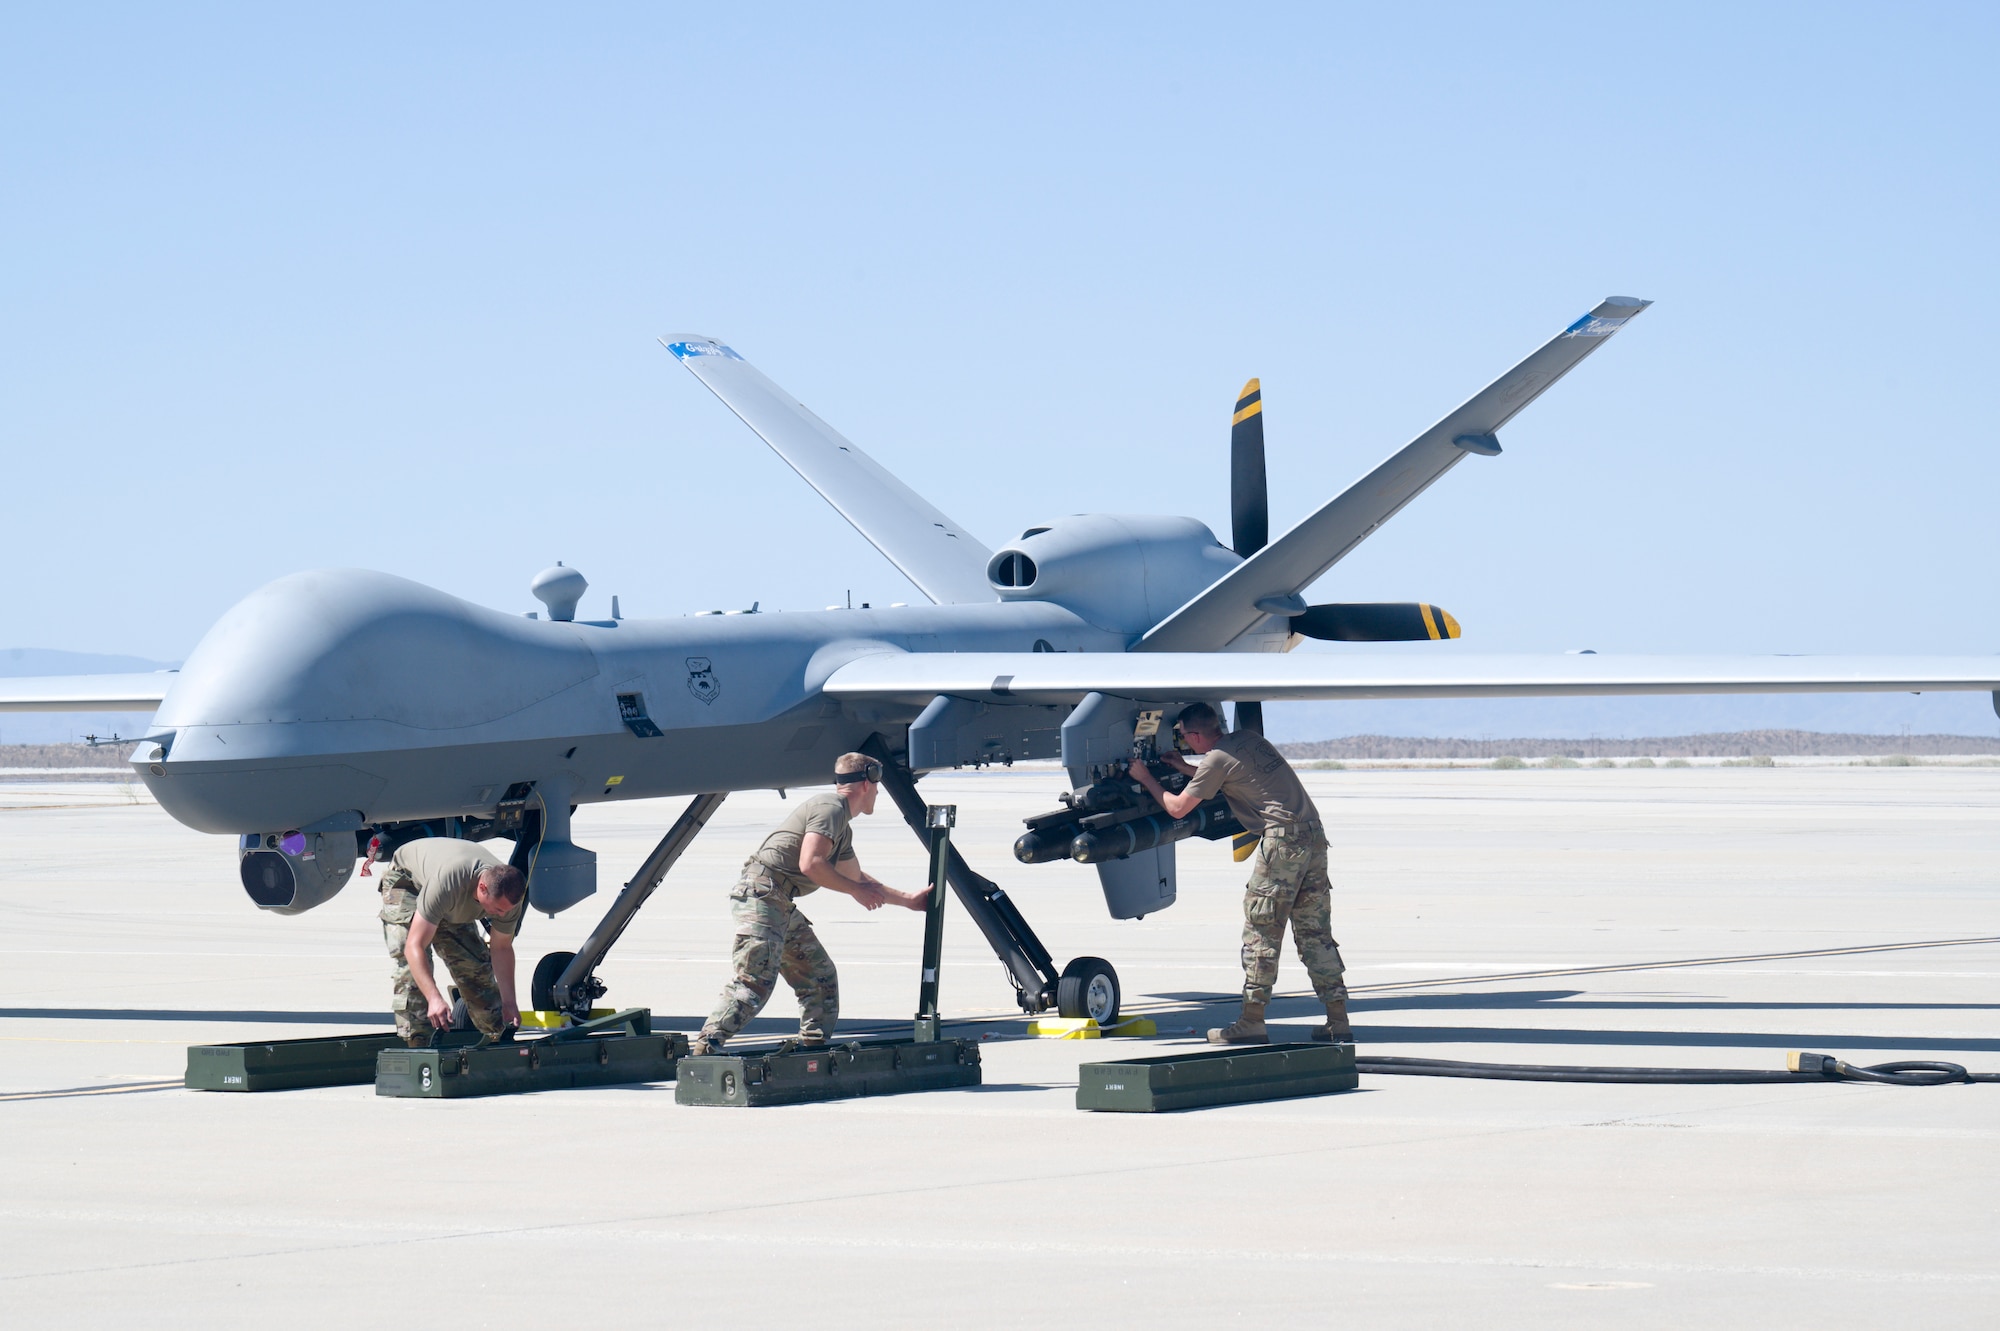 Airmen from the 163rd Attack Wing, out of March Air Reserve Base, load inert training weapons to an MQ-9 Reaper at Edwards Air Force Base, California, May 4. The aircraft conducted an Agile Combat Employment (ACE) to a Forward Operating Site (FOS), flying from March Air Reserve Base to Edwards Air Force Base. (Air Force photo by Giancarlo Casem)